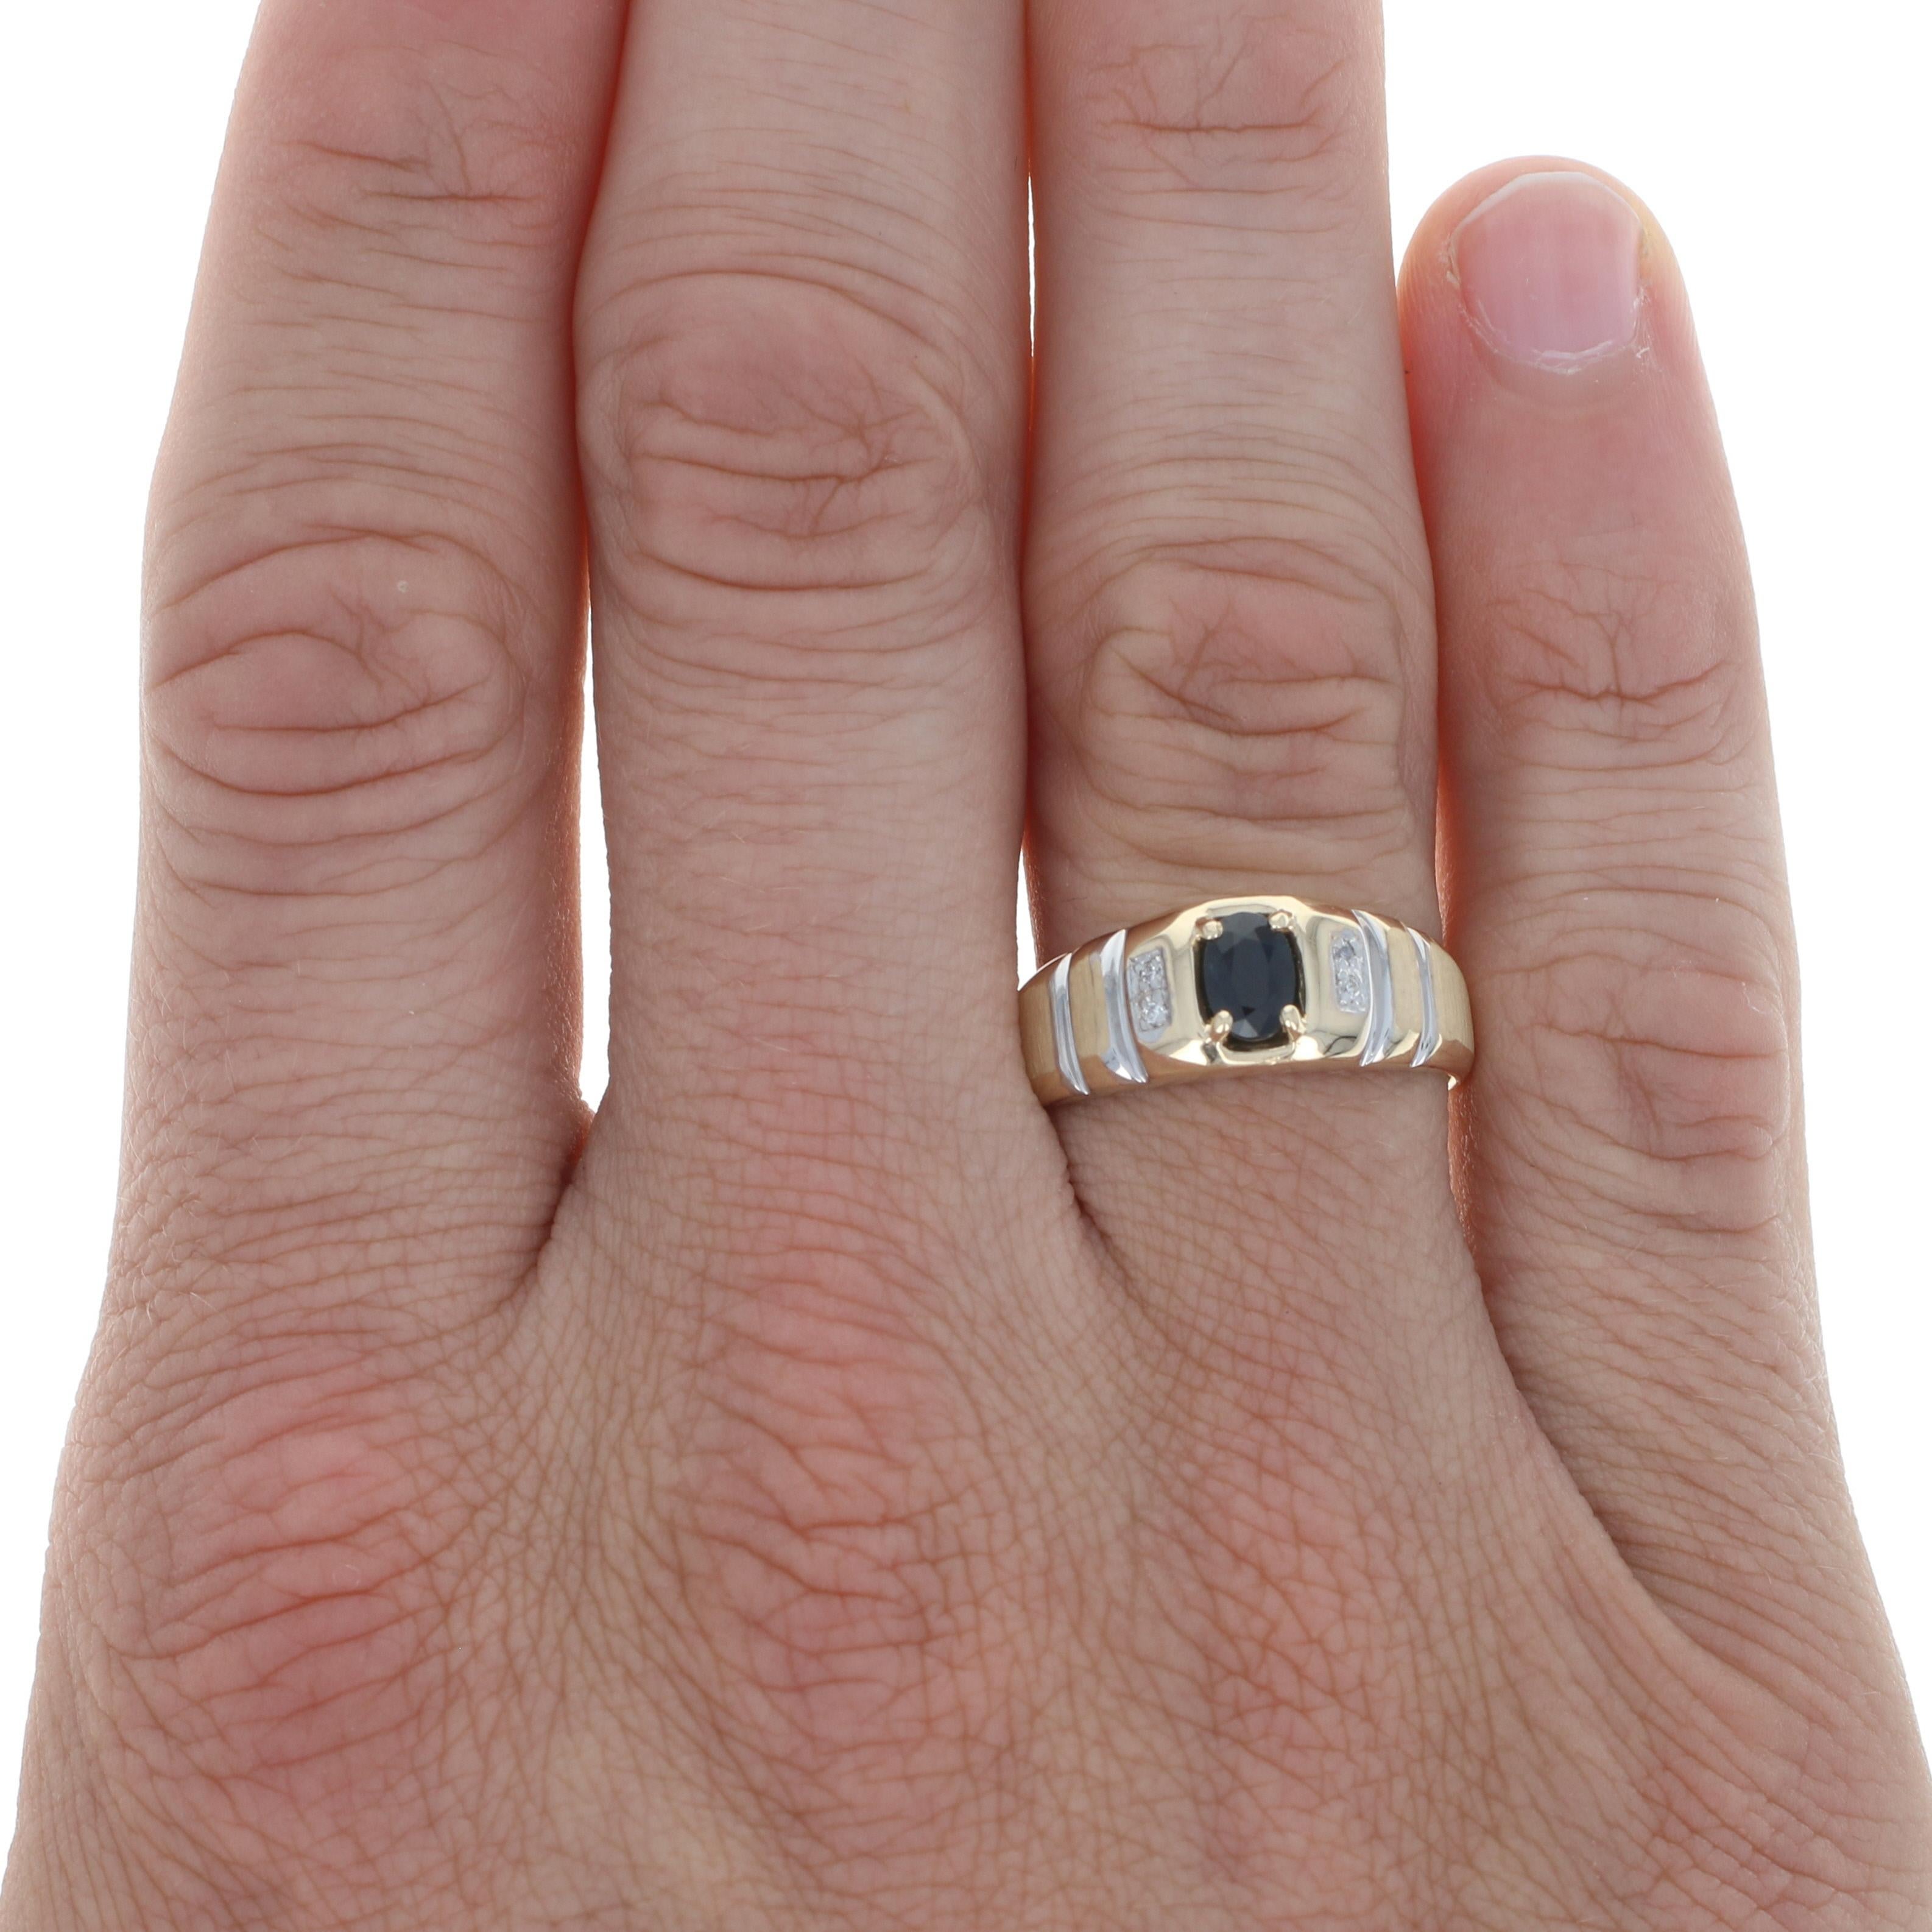 Size: 10
Sizing Fee: Down 1 size for $30 or Up 2 sizes for $35

Metal Content: 10k Yellow Gold & 10k White Gold

Stone Information: 
Genuine Sapphire
Treatment: Heating
Carat: .65ct
Cut: Oval
Color: Blue
Size: 6.2mm x 4.2mm

Natural Diamonds
Carats: